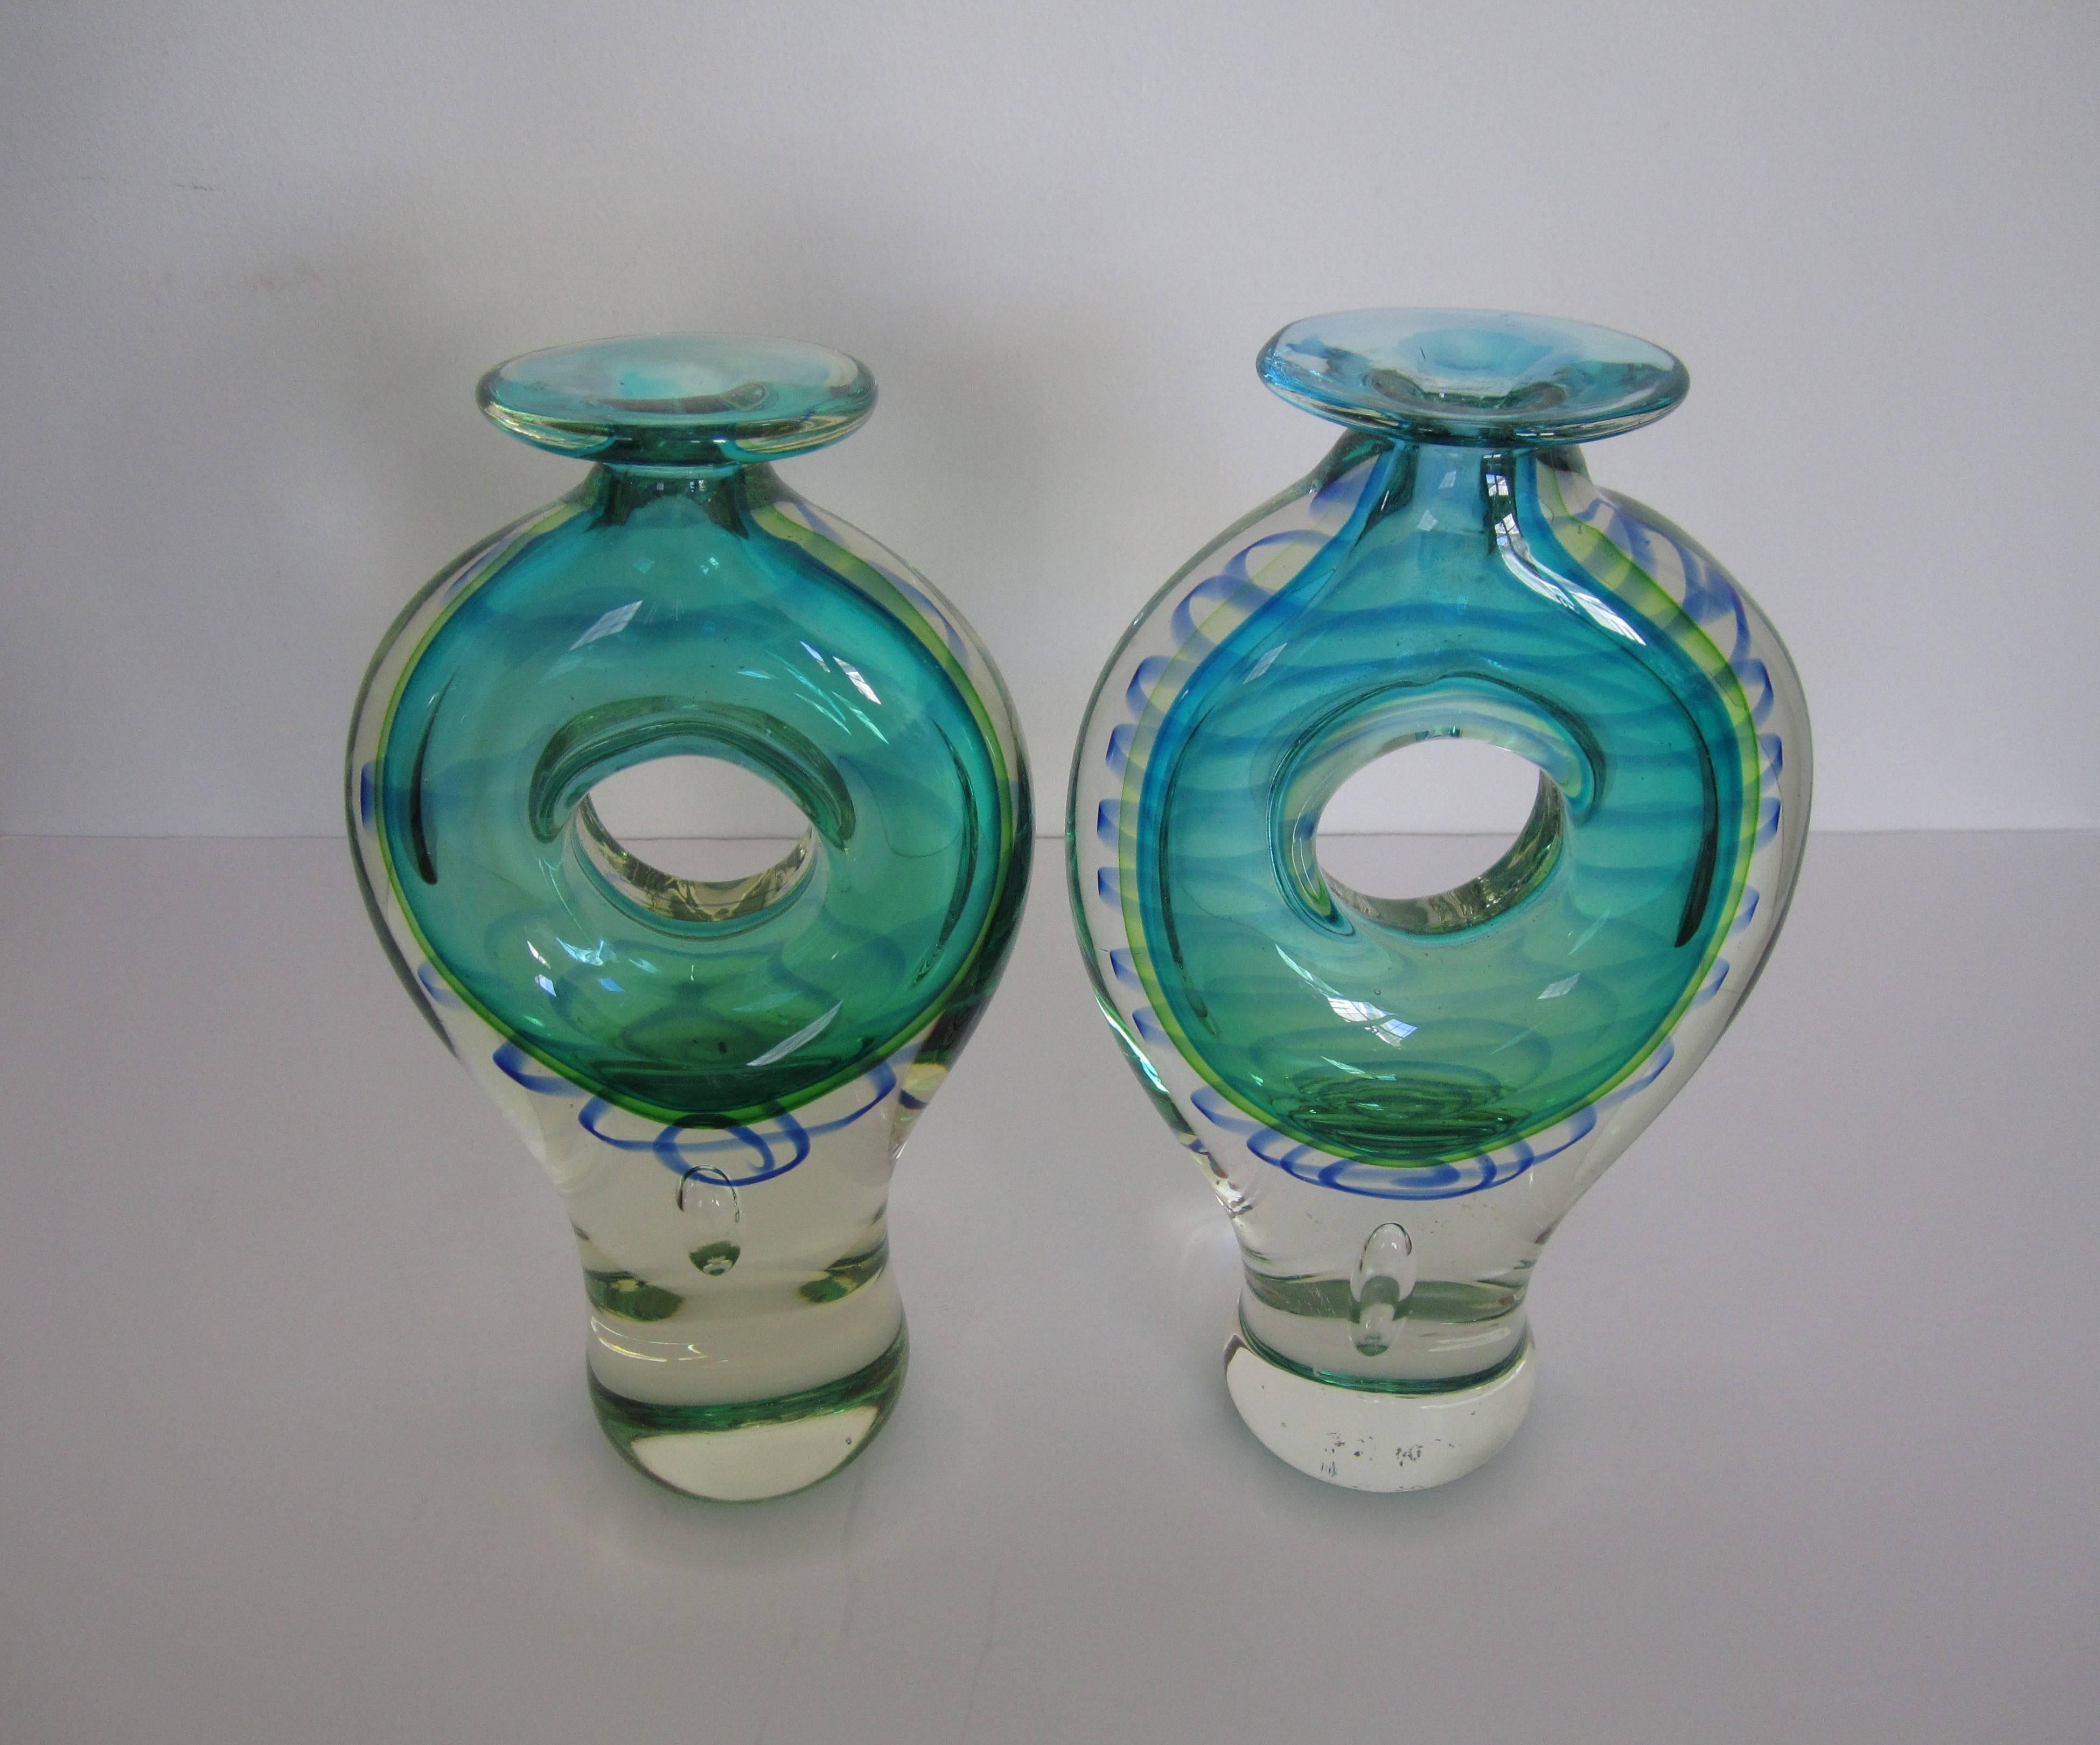 Pair/Set Available Here for $650

A colorful and substantial pair of Post-Modern clear art glass vessels or vases with green and blue glass hues. 

Measuring is approximately 10 in. H. 

Pair is available here online. By request, pair can be made